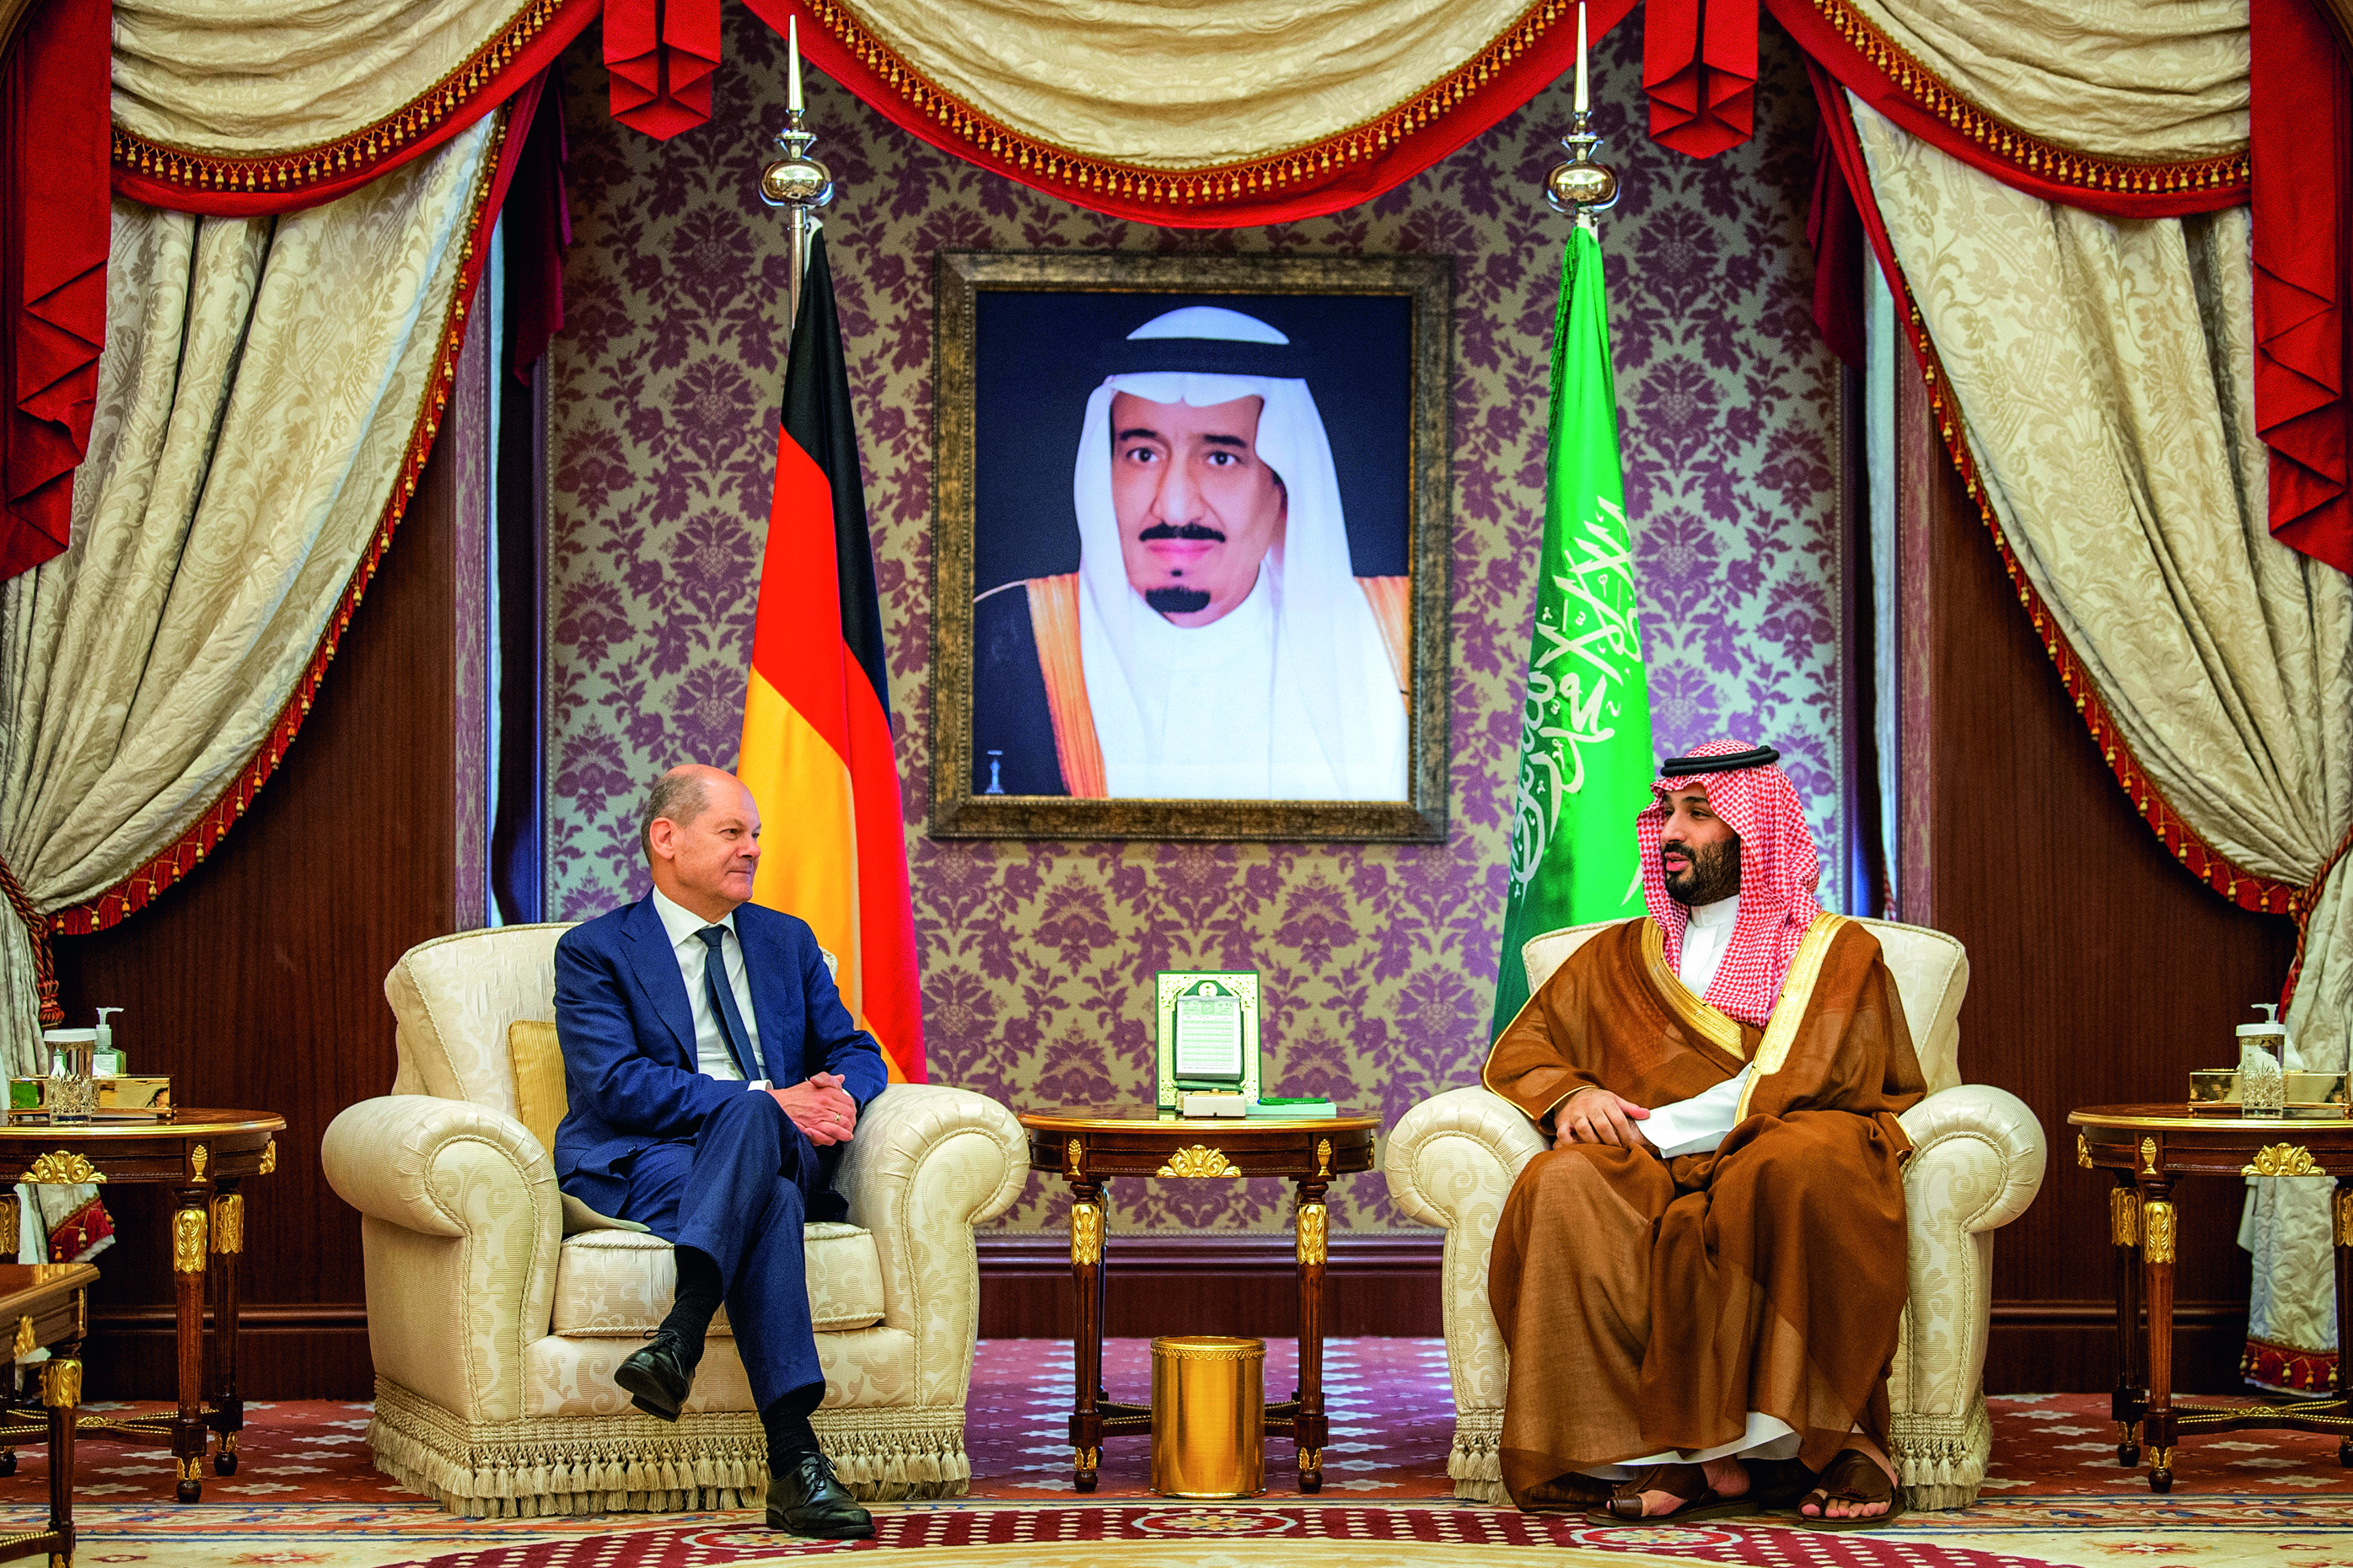 RUN - Chancellor Olaf Scholz in Arabia: quest for cleaner fuels -